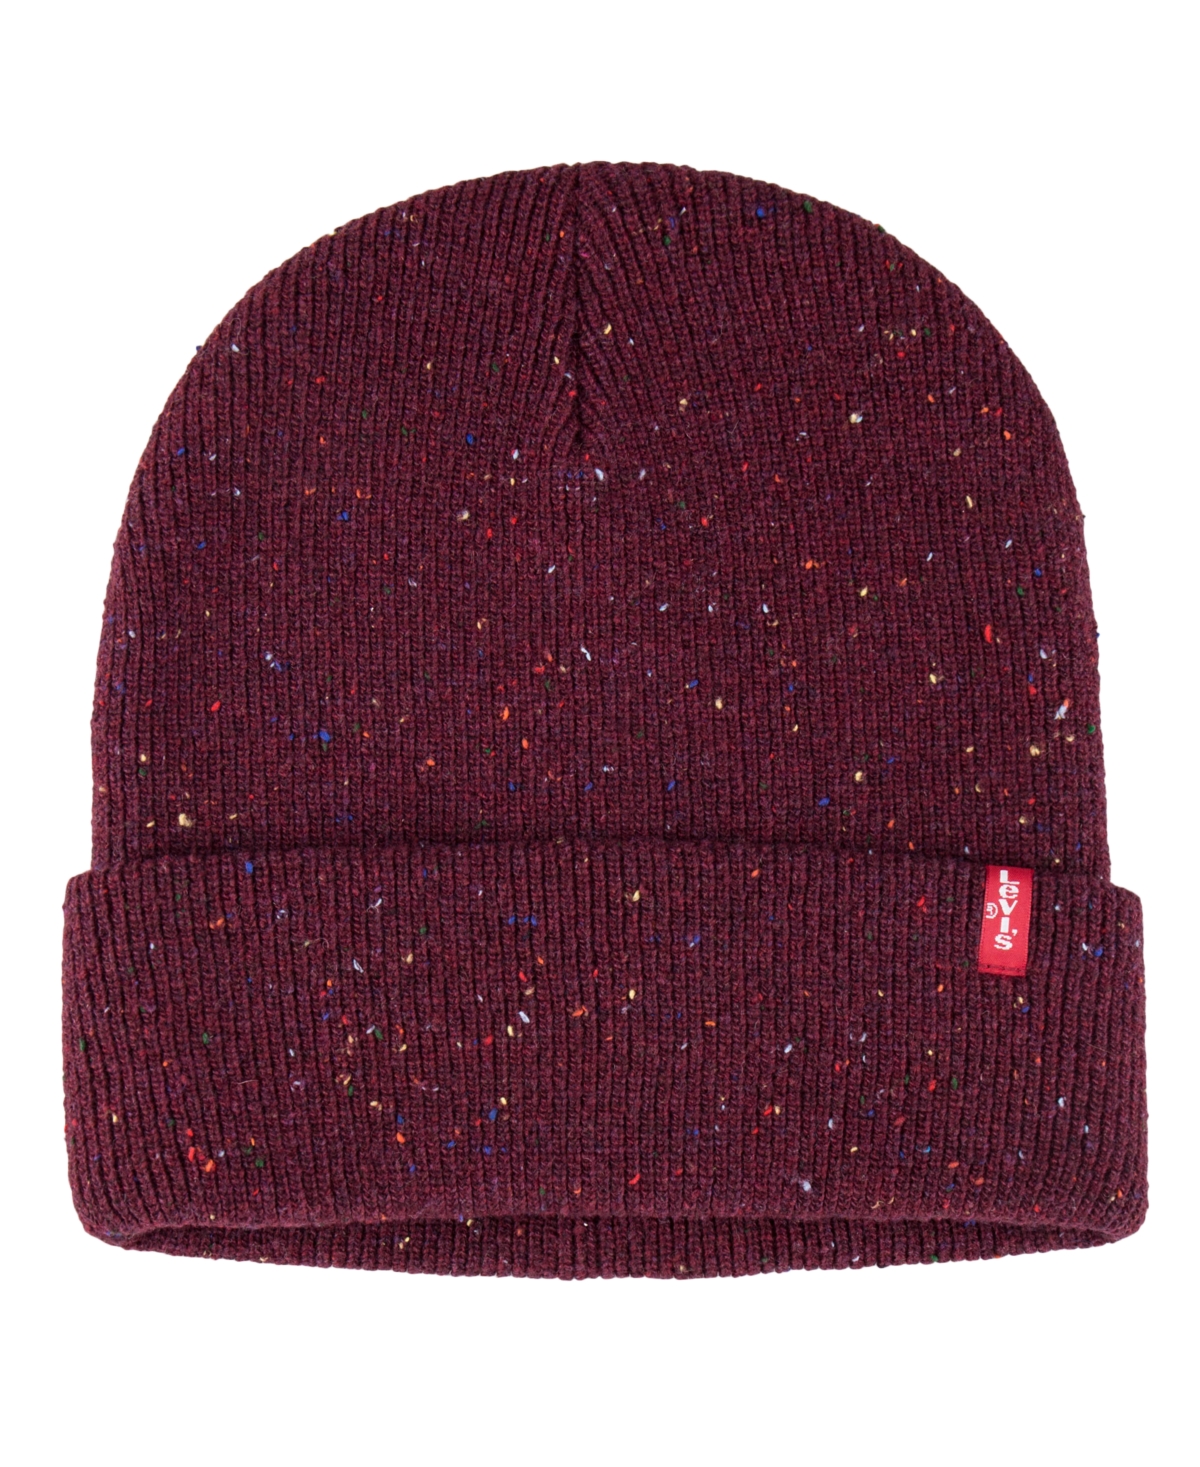 Levi's Men's Speckled Donegal Rib Knit Cuffed Beanie In Burgundy